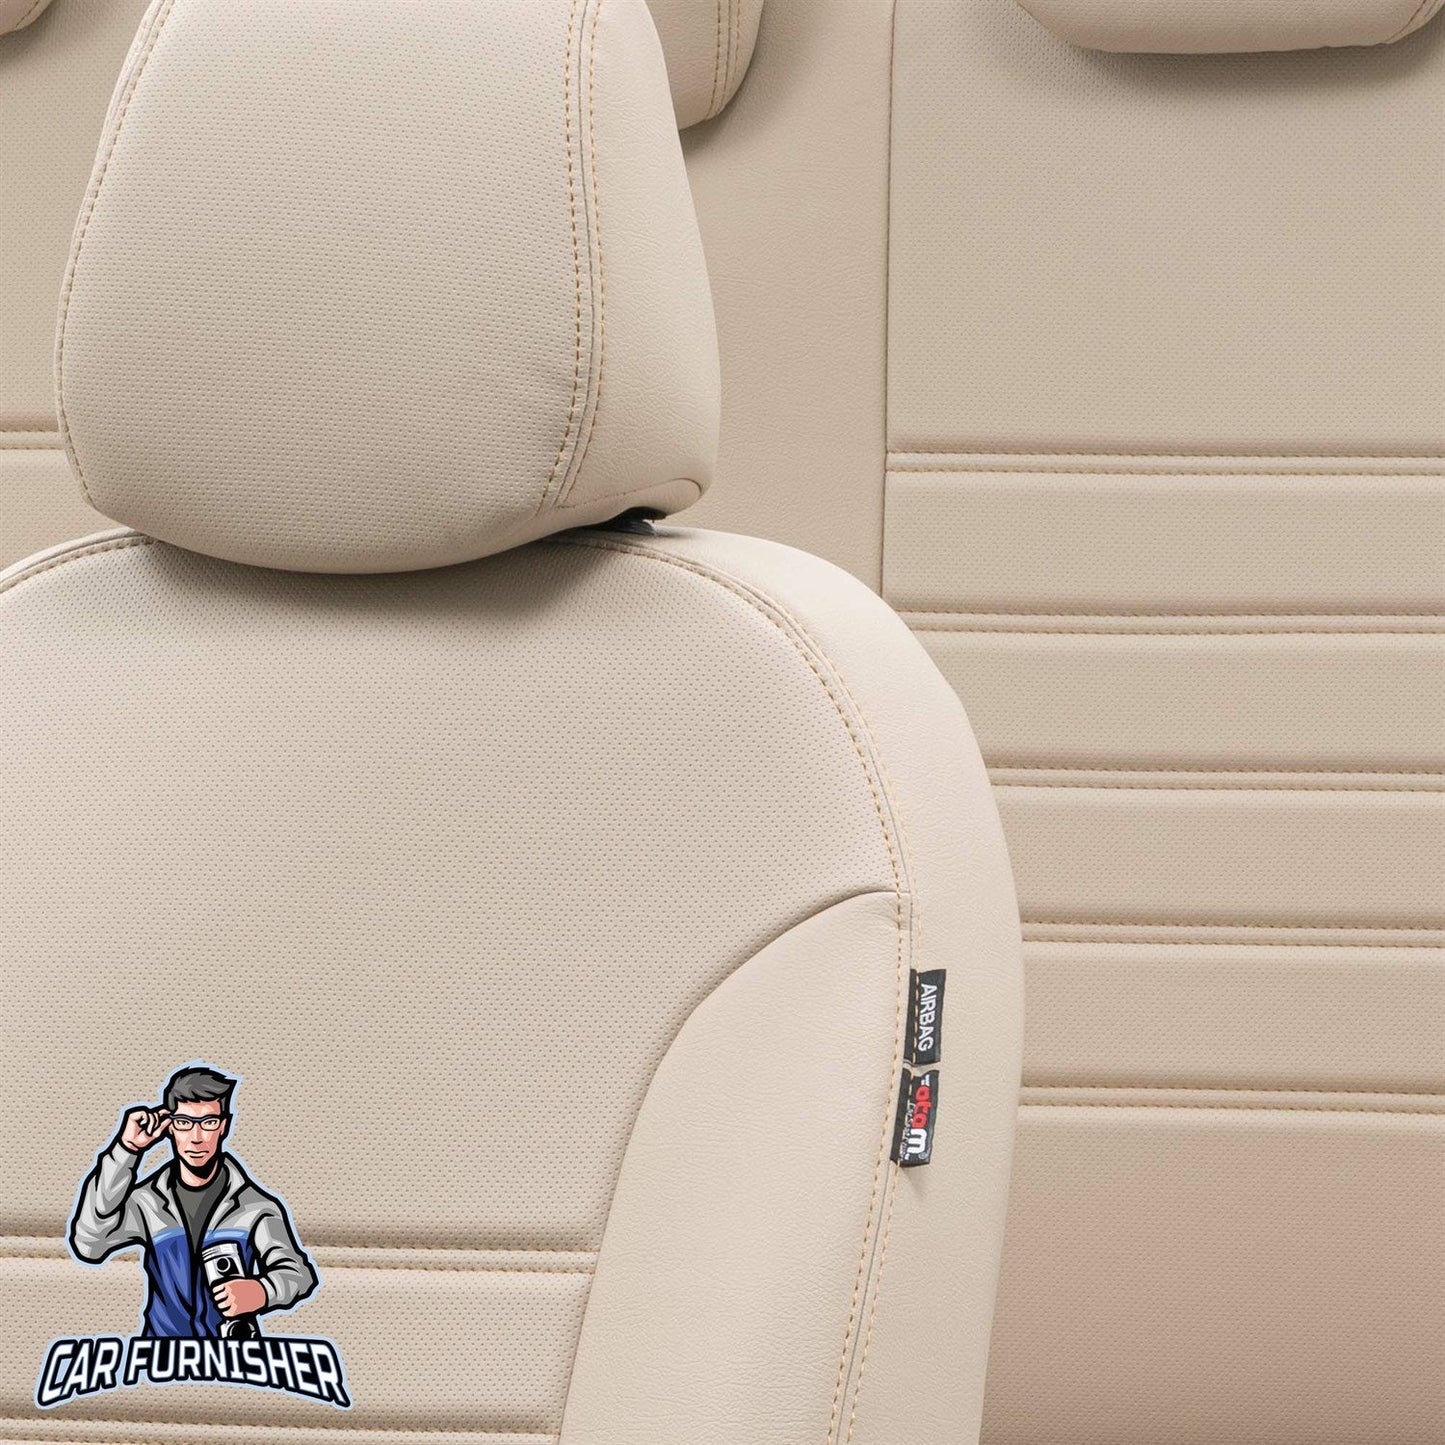 Volkswagen CC Seat Cover Istanbul Leather Design Beige Leather